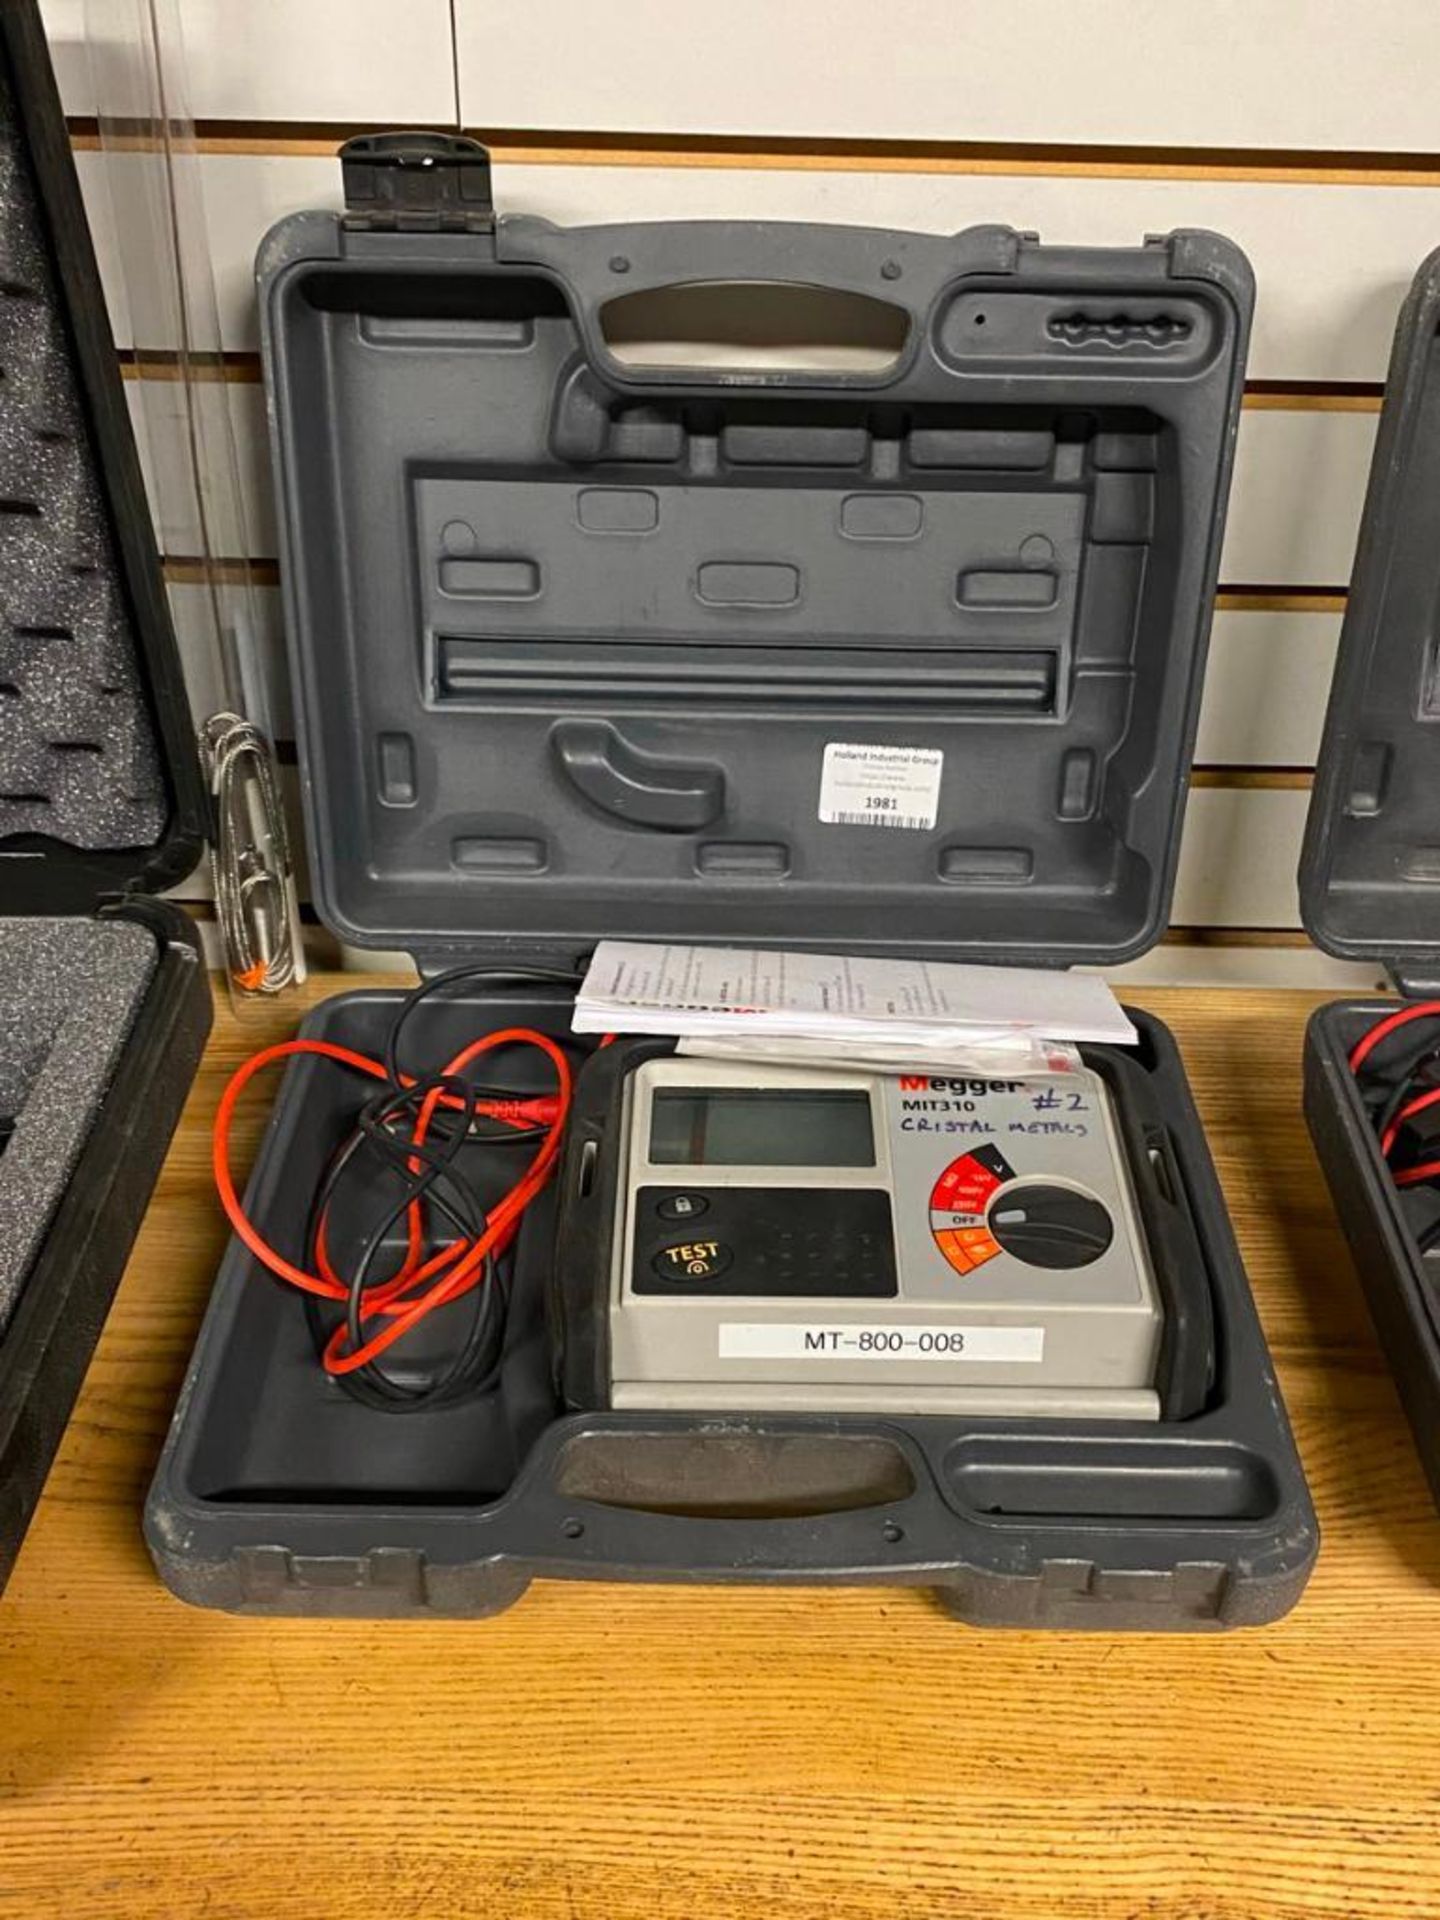 Megger Model Mit310 Insulation And Continuity Tester